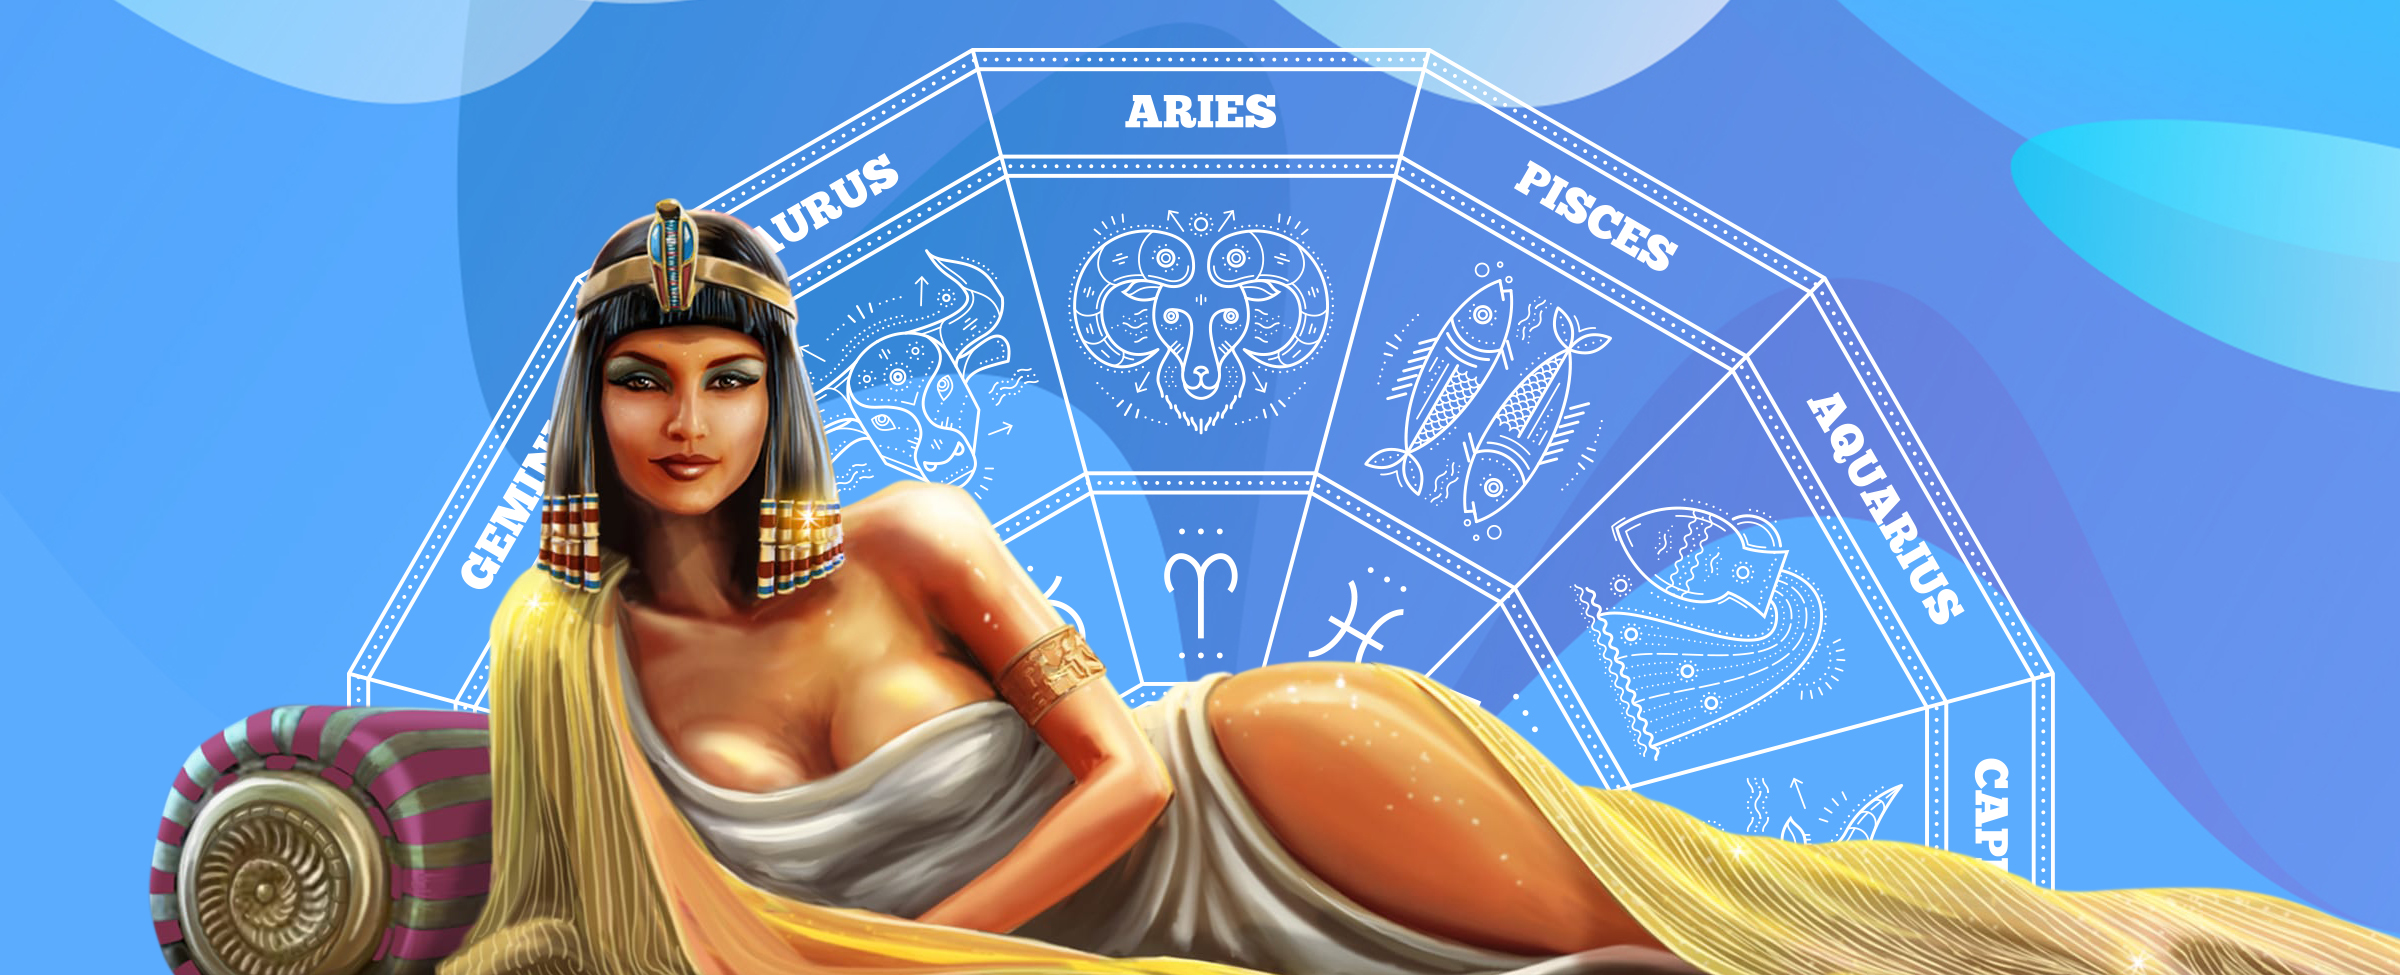 A 3D-animated Cleopatra from the SlotsLV slot game “A Night With Cleo” is depicted on a daybed wearing a thin robe, while in the background, a horoscope wheel featuring various symbols is shown.